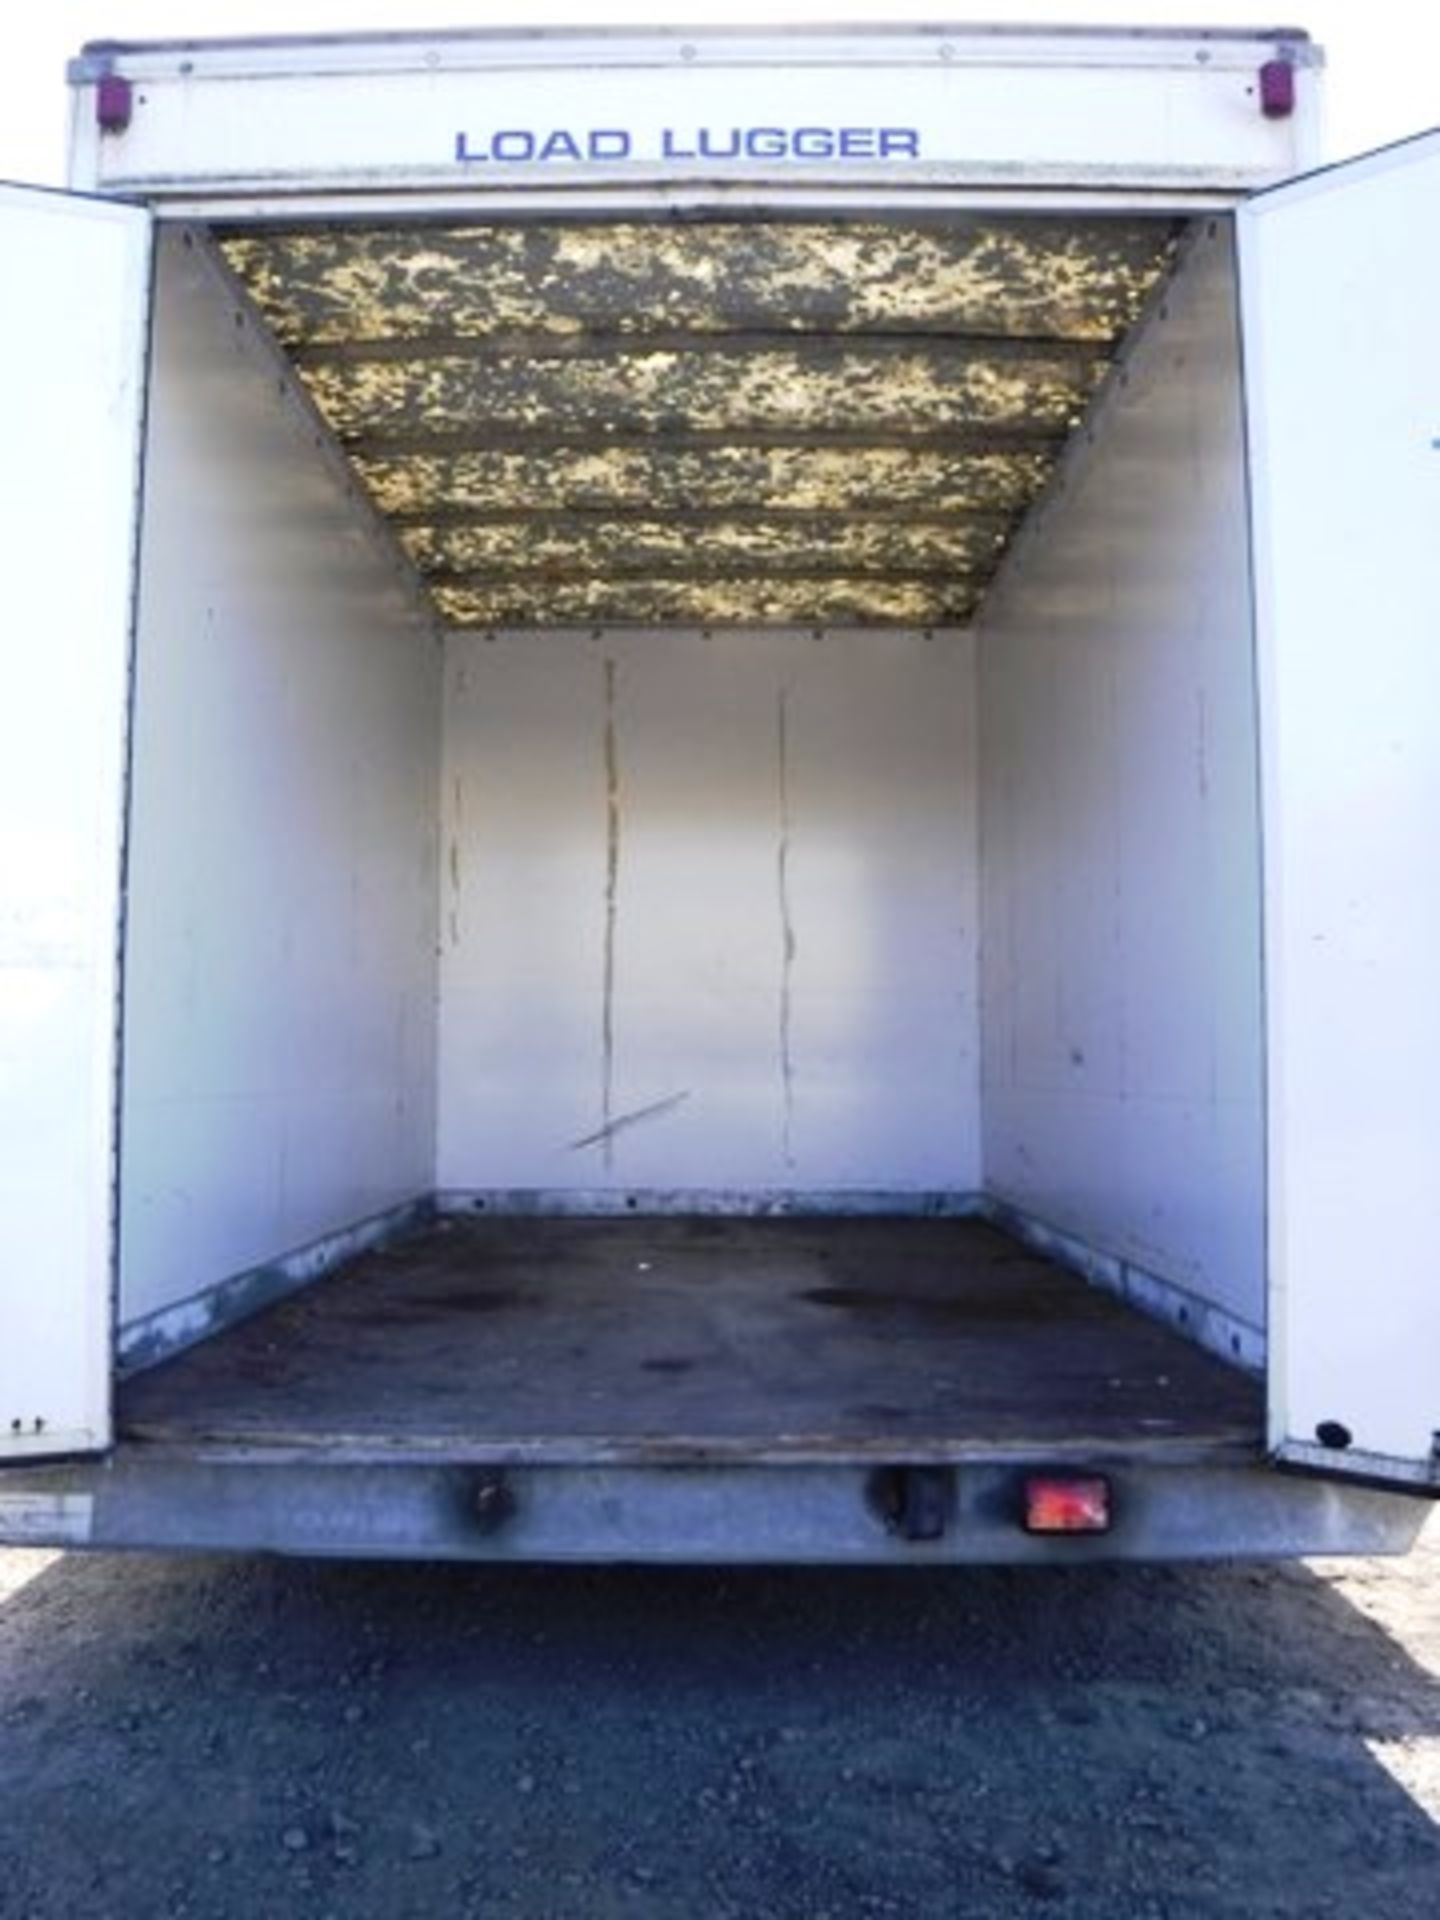 LYNTON load lugger twin axle box trailer. 10ft x 6ft x 6.7" high. S/N 3E7682. Works weight 650kgs. G - Image 12 of 12